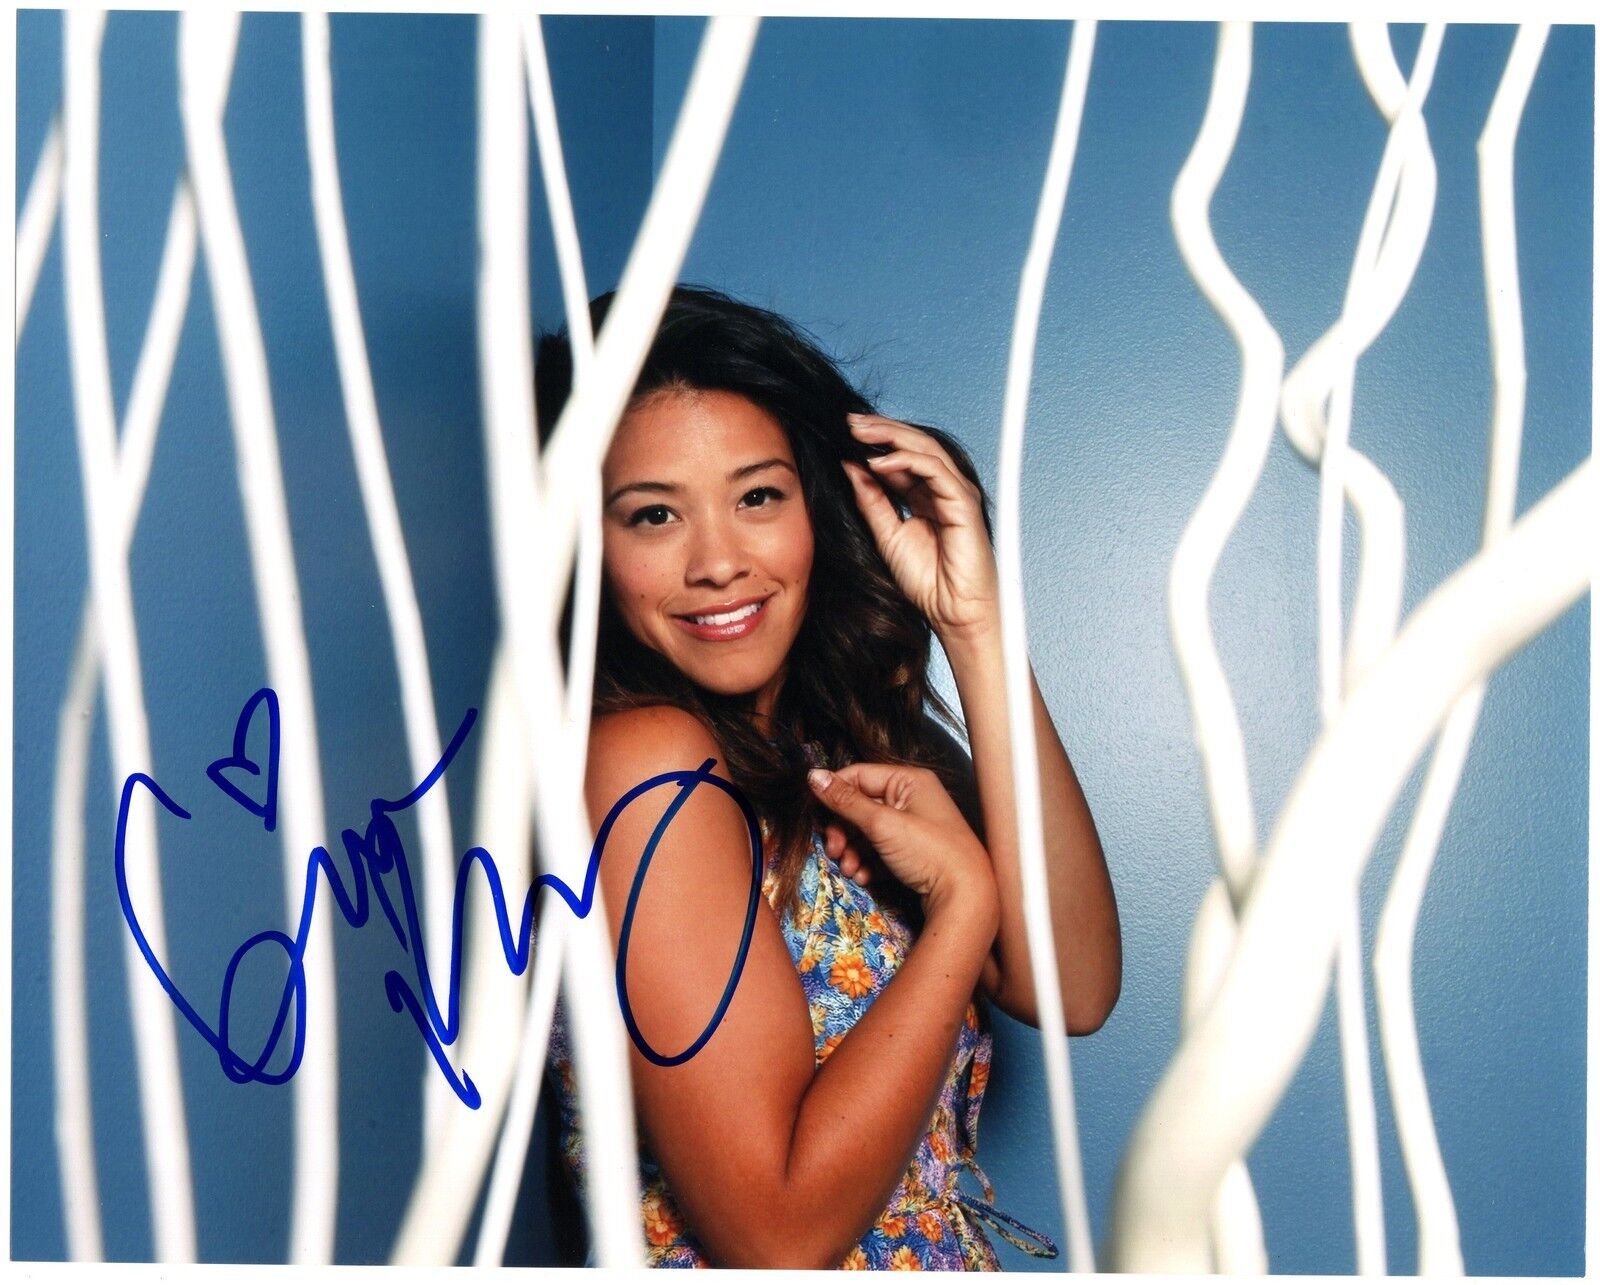 Gina Rodriguez Jane the Virgin Filly Brown Signed 8x10 Photo Poster painting w/COA #2